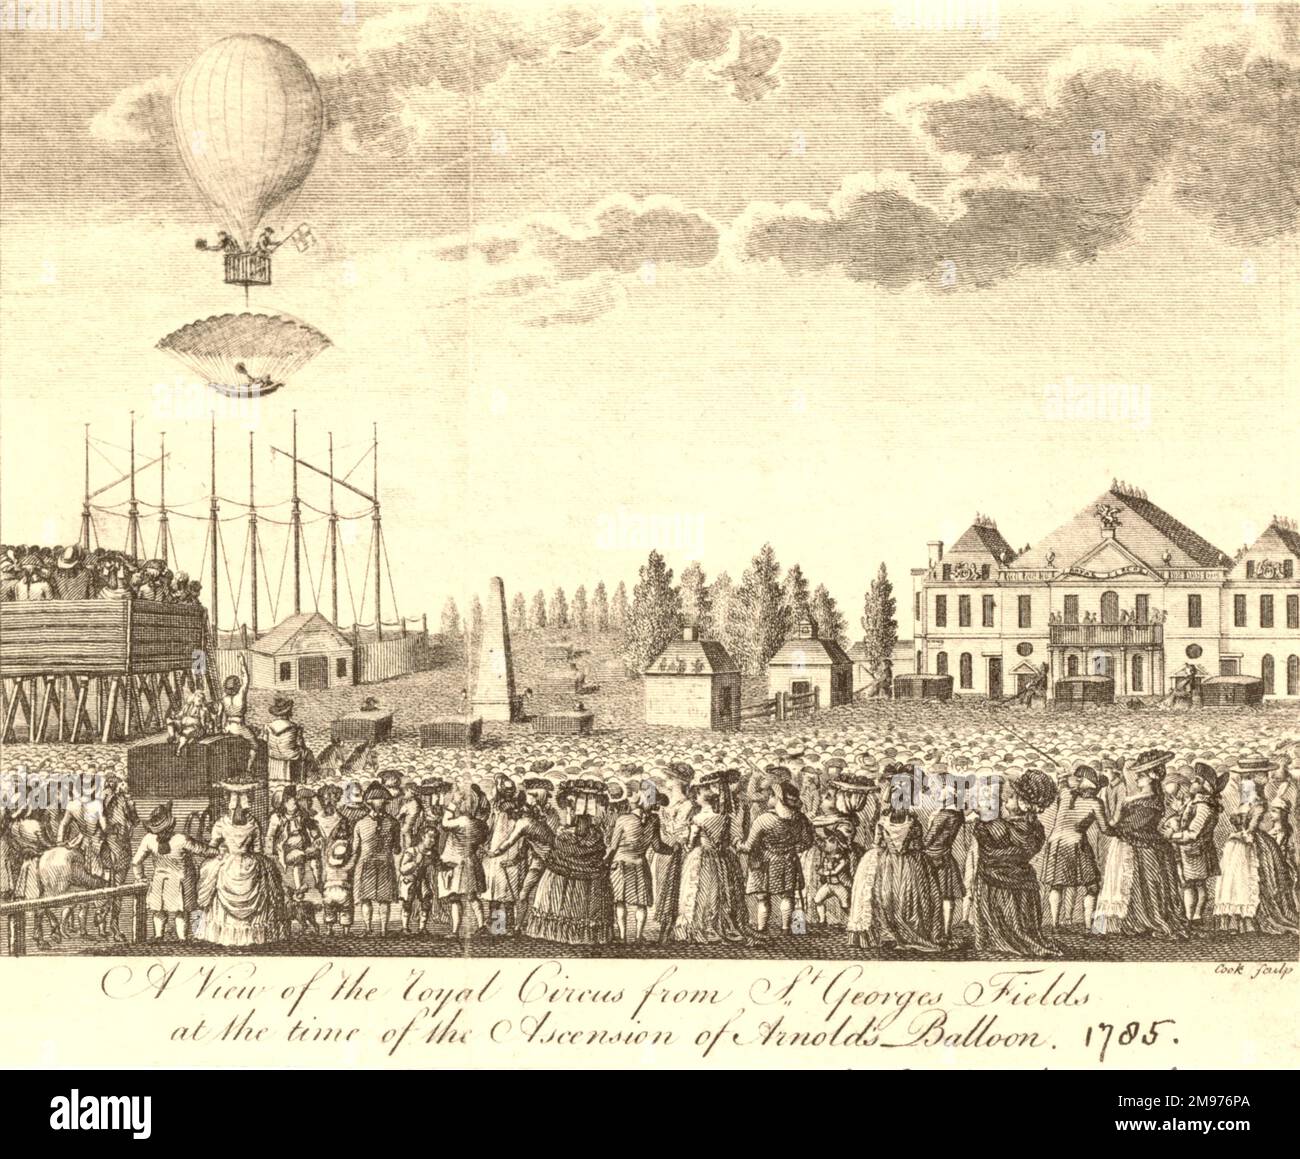 Schild mit „A View of the Royal Circus from St Georges Fields at the Ascension of Arnold’s Balloon. 1785.“ Stockfoto